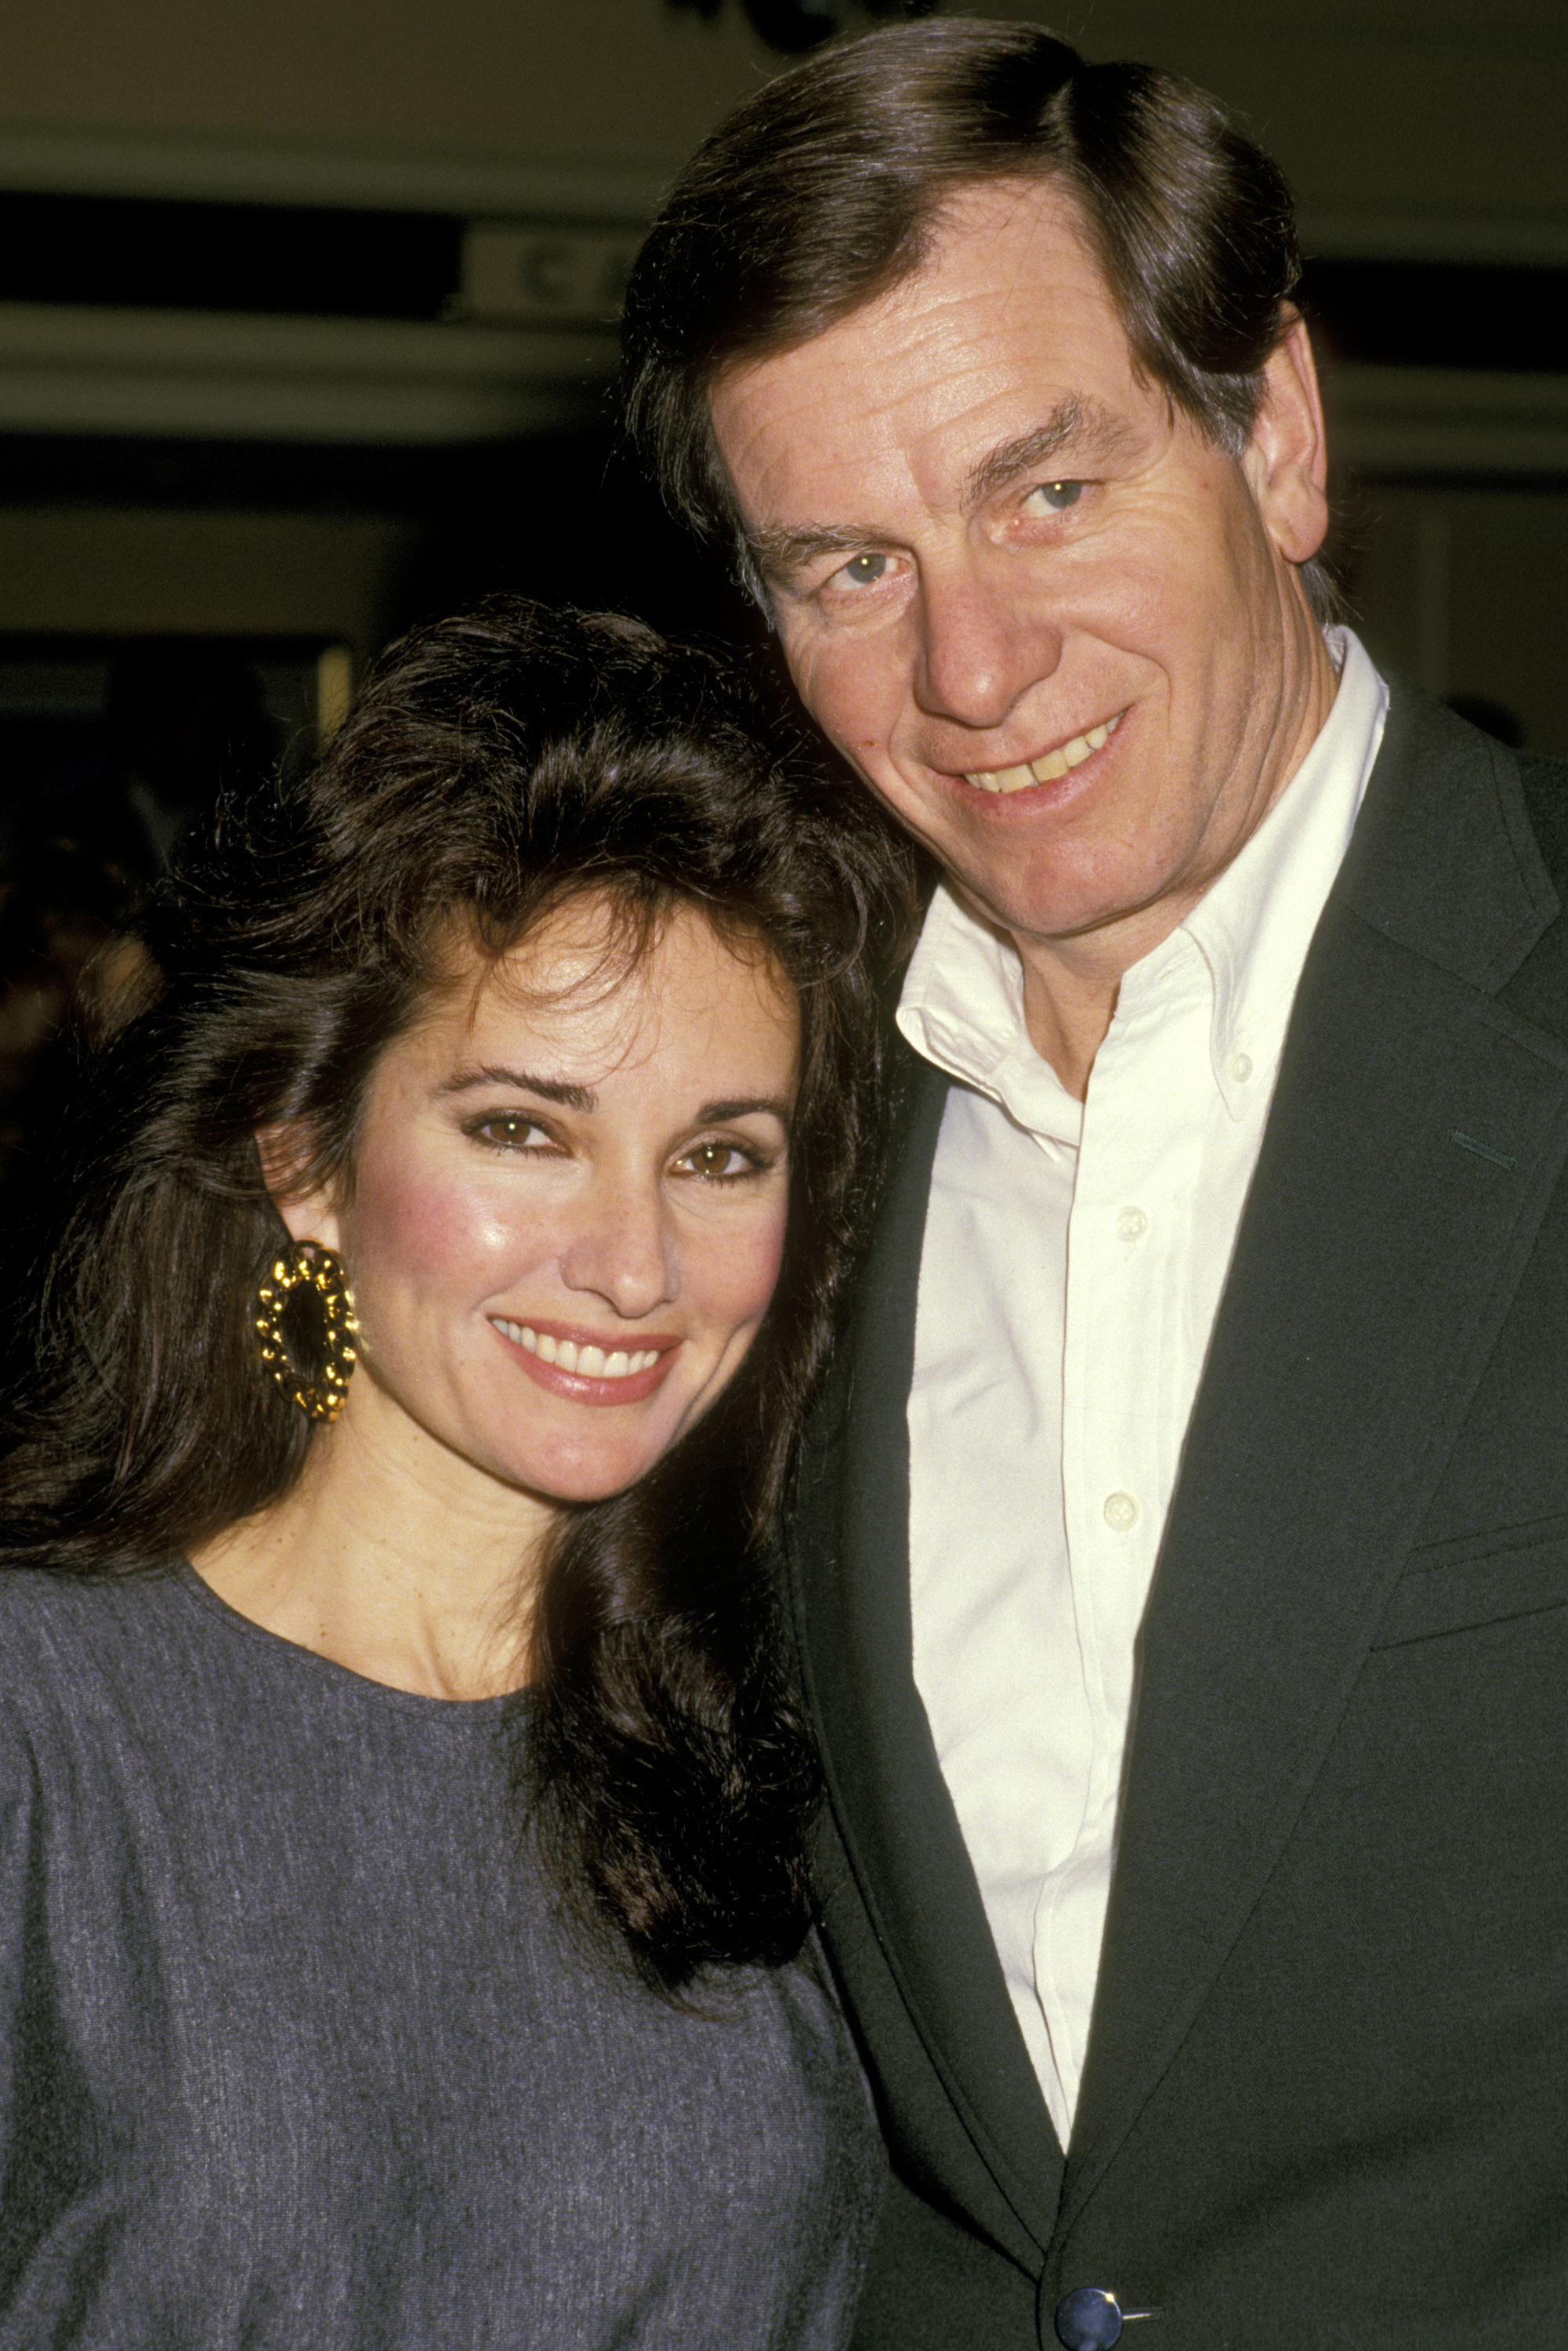 Susan Lucci and Helmut Huber at the American Cinema Awards Rehearsals on January 29, 1988 | Source: Getty Images